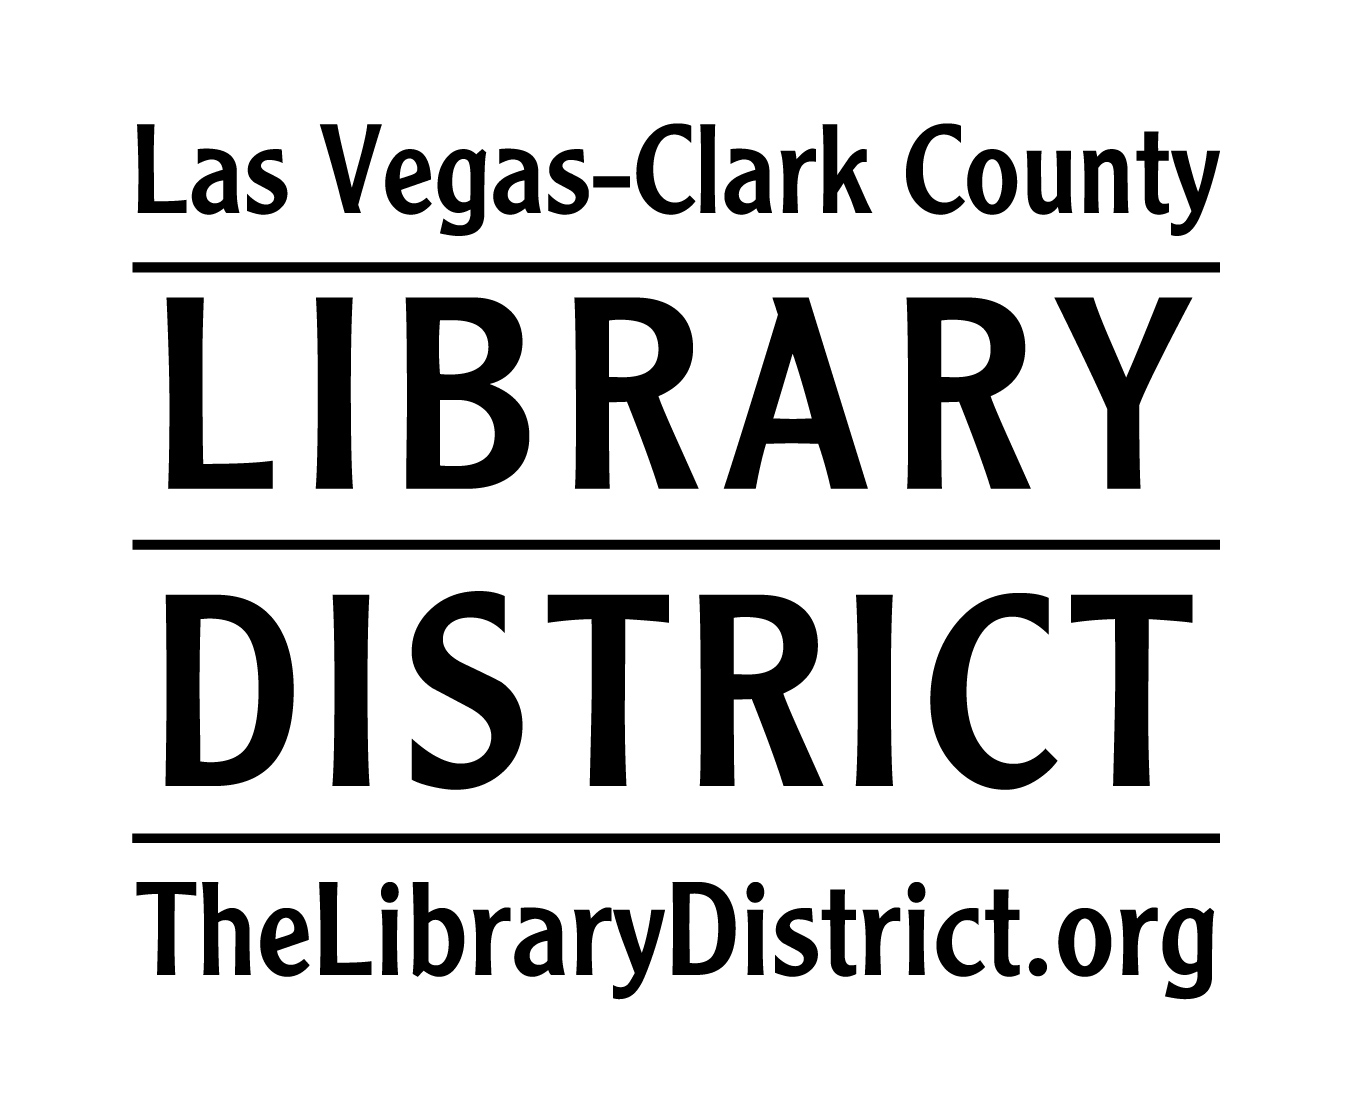 Limitless Learning  Las Vegas-Clark County Library District